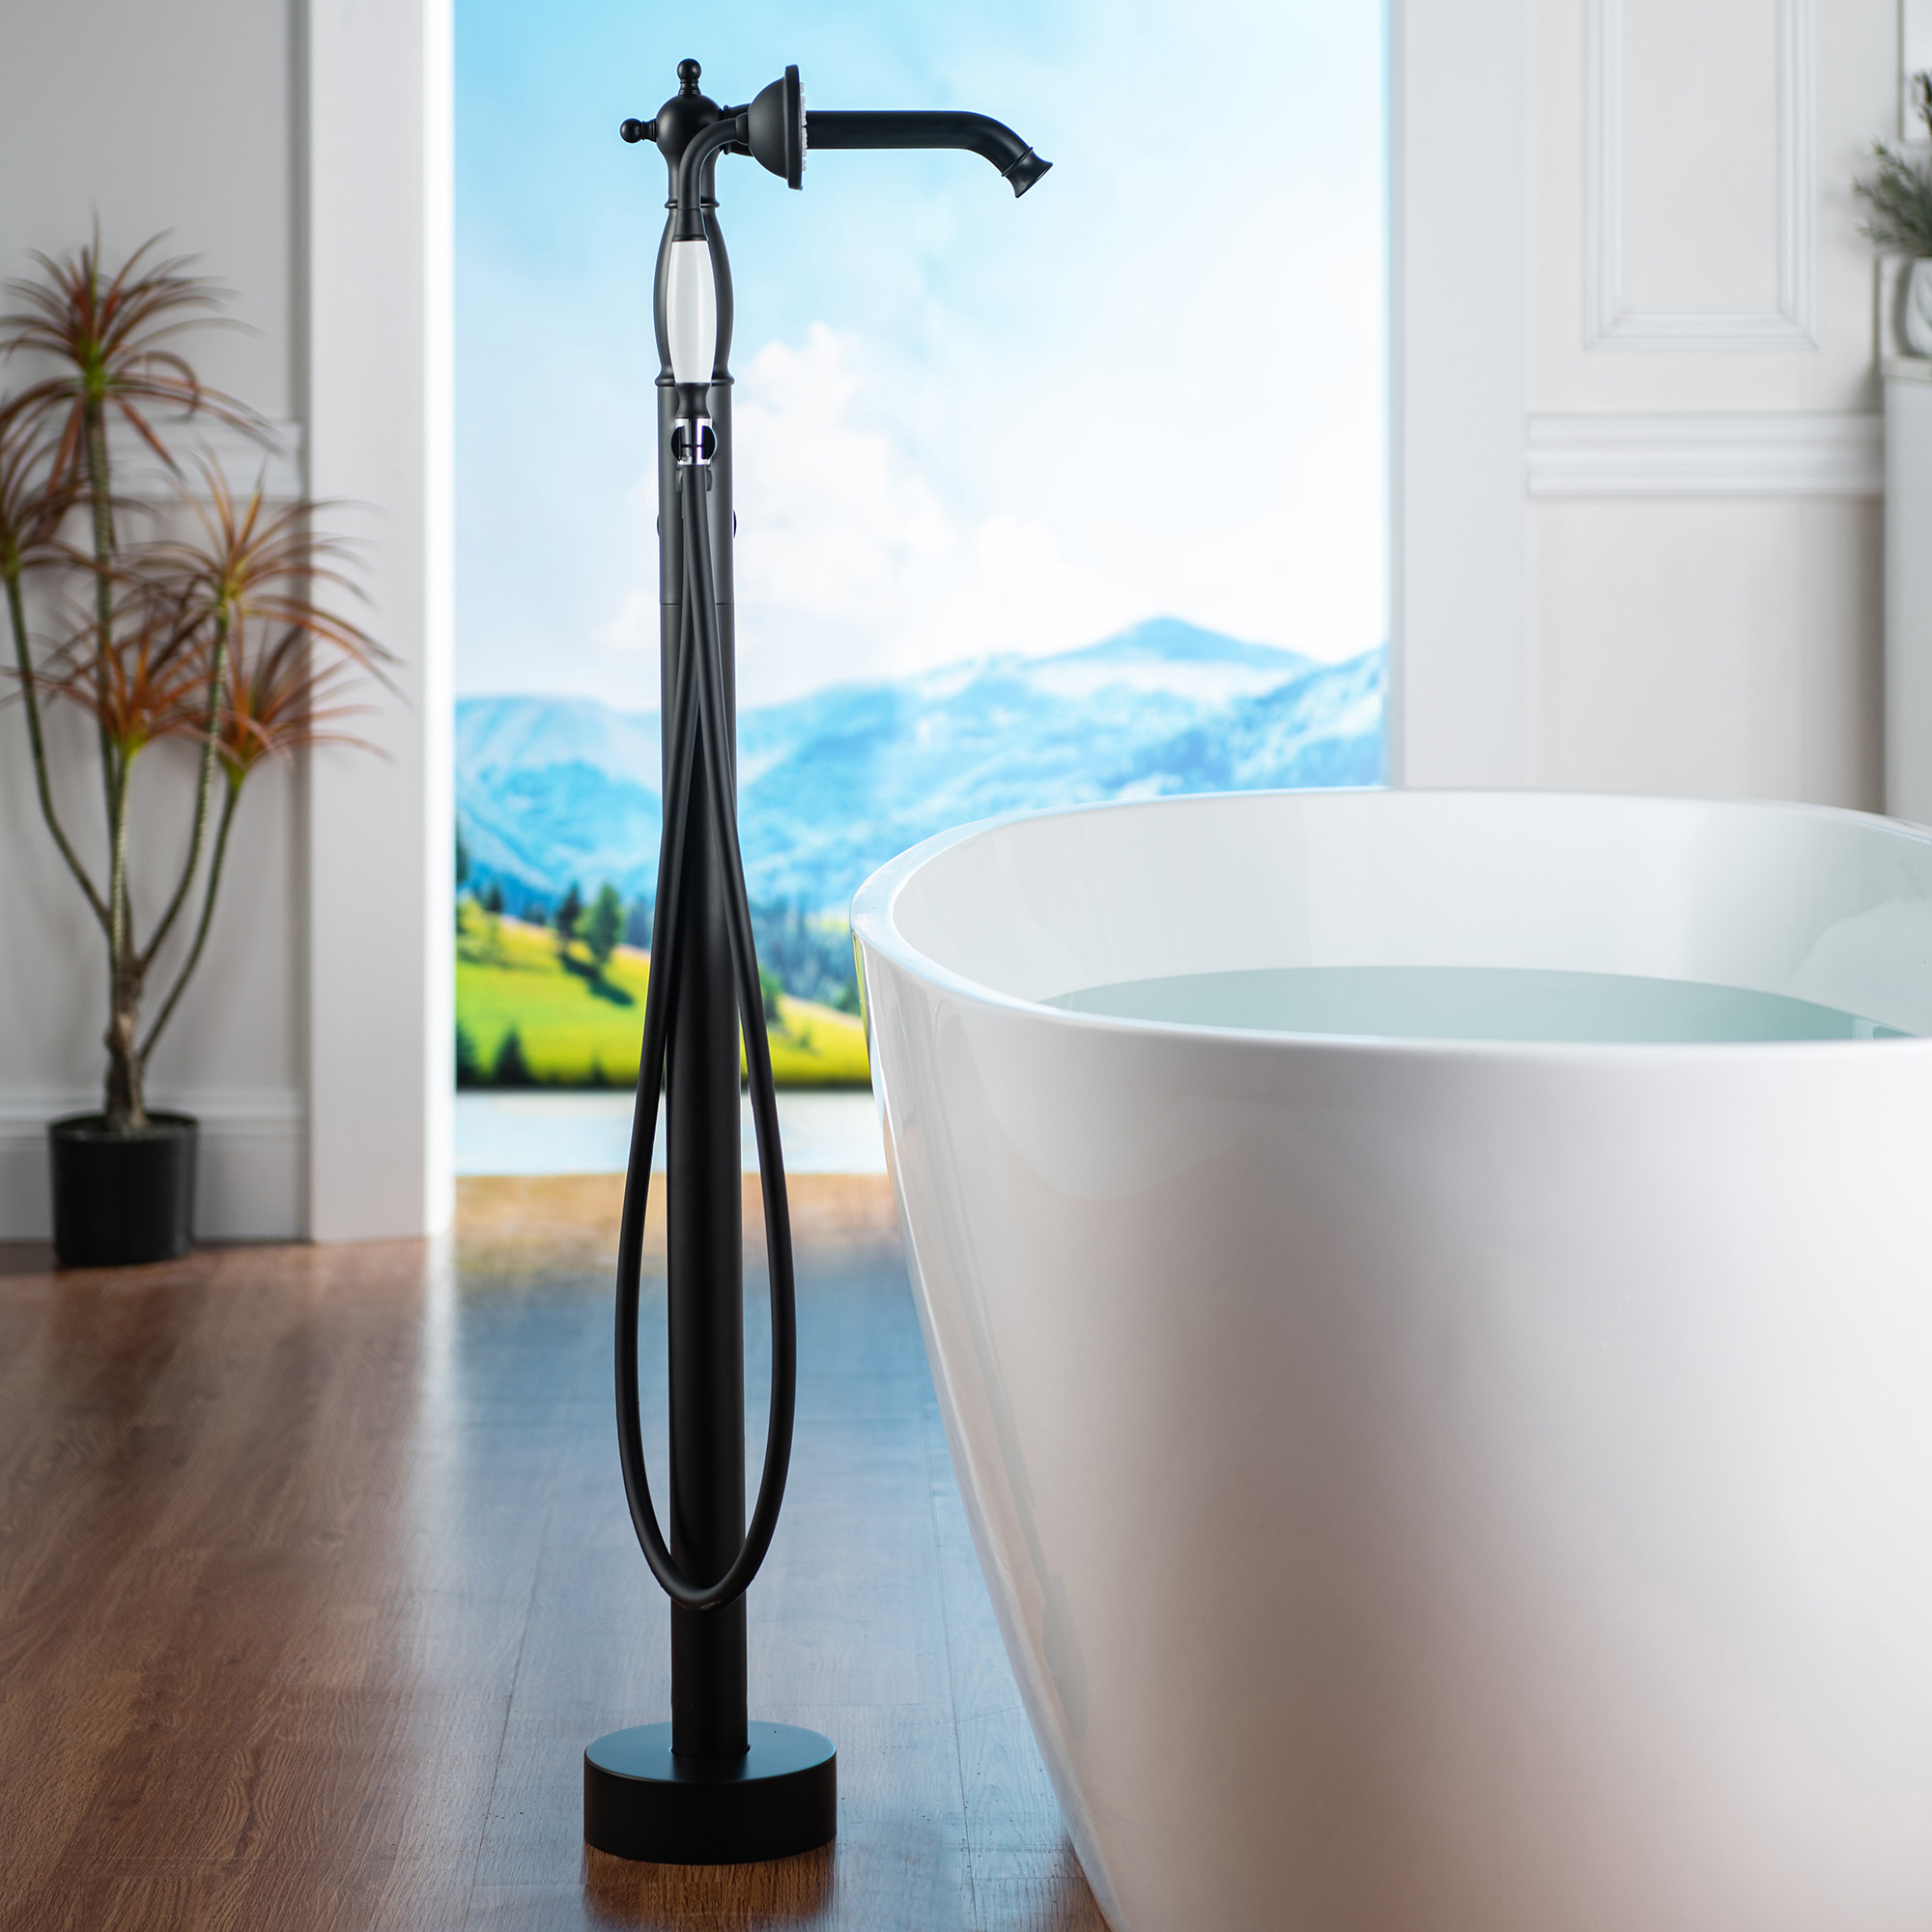  WOODBRIDGE F0048MB Fusion Single Handle Floor Mount Freestanding Tub Filler Faucet with Telephone Hand shower in Matte Black Finish_12270